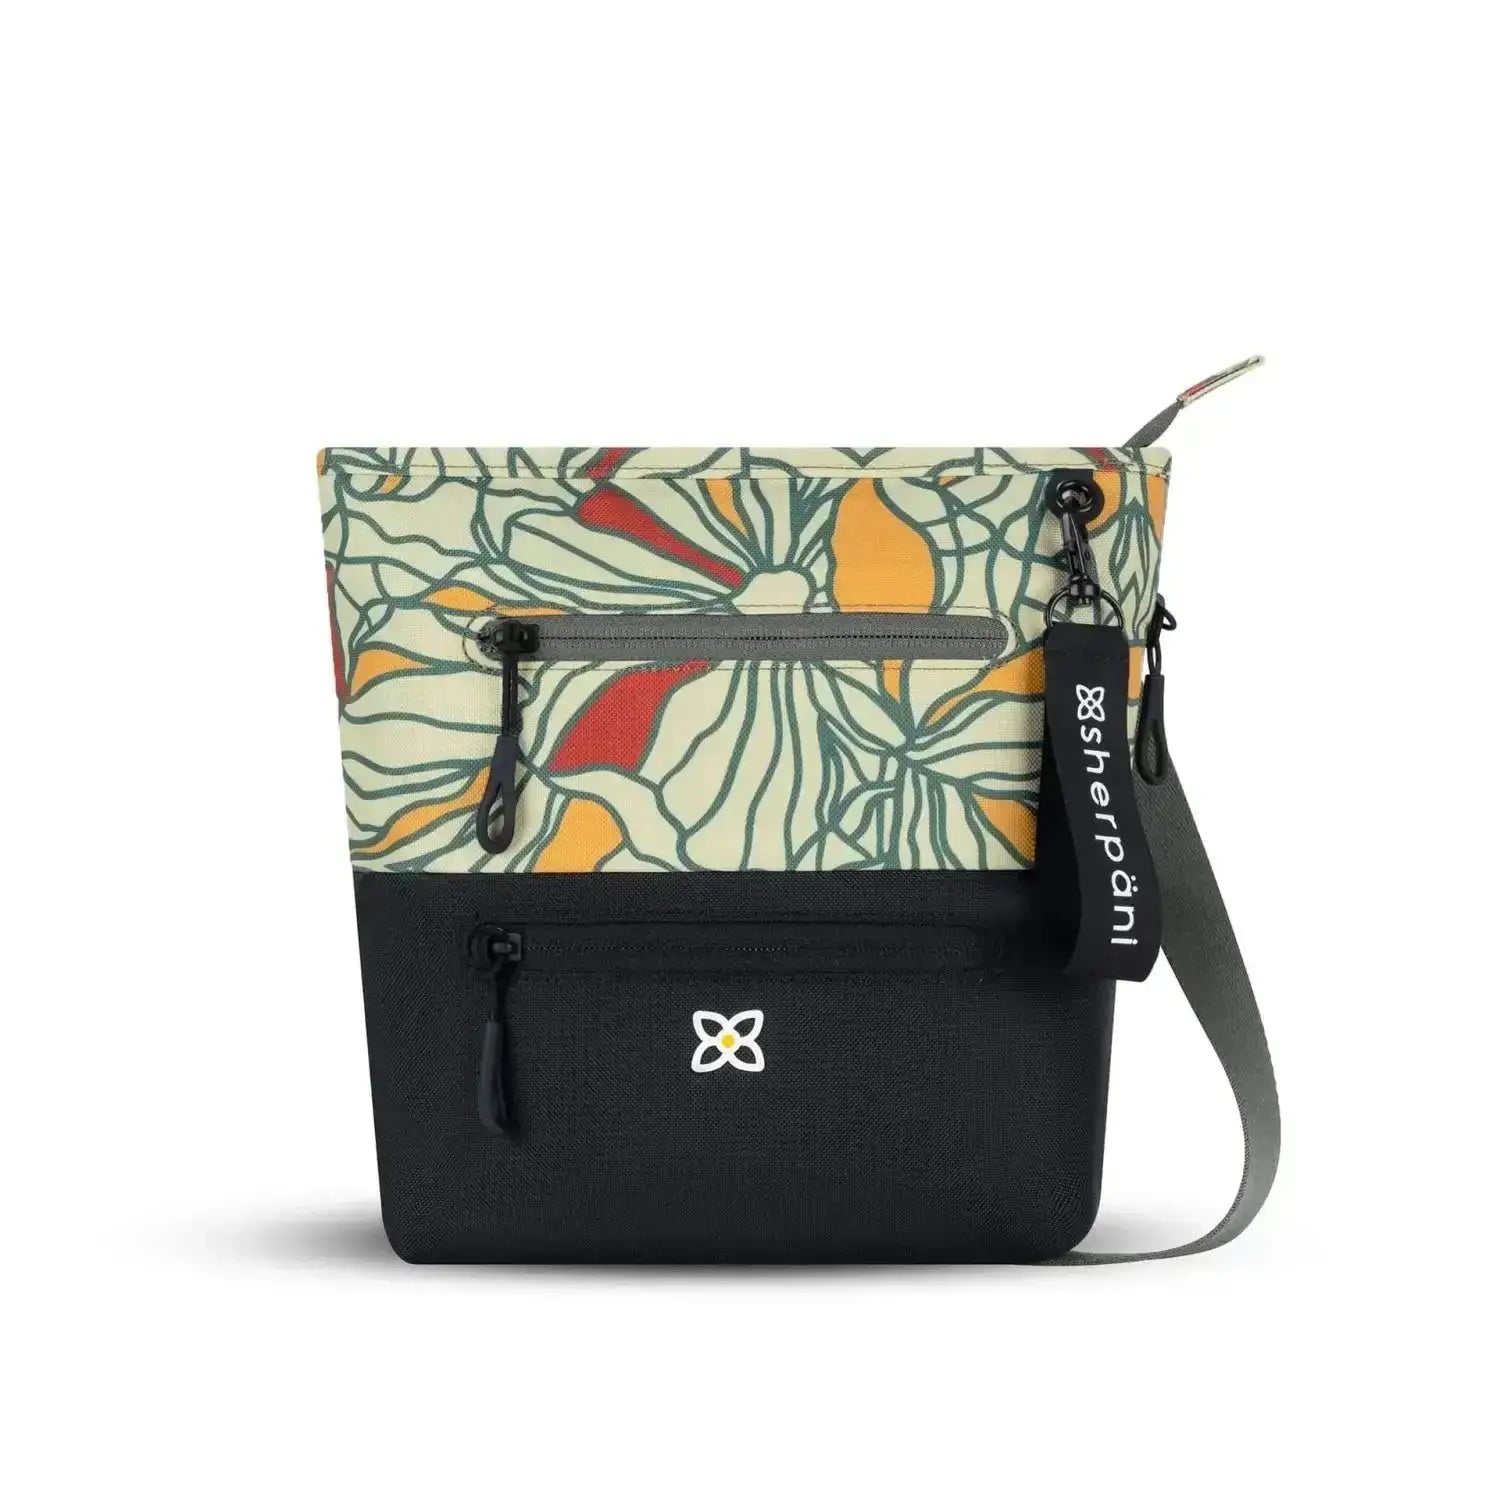 Sherpani Sadie bag in Fiori with geometric print top (grey lines, with dark pink and yellow flower) and black bottom half. Front view.